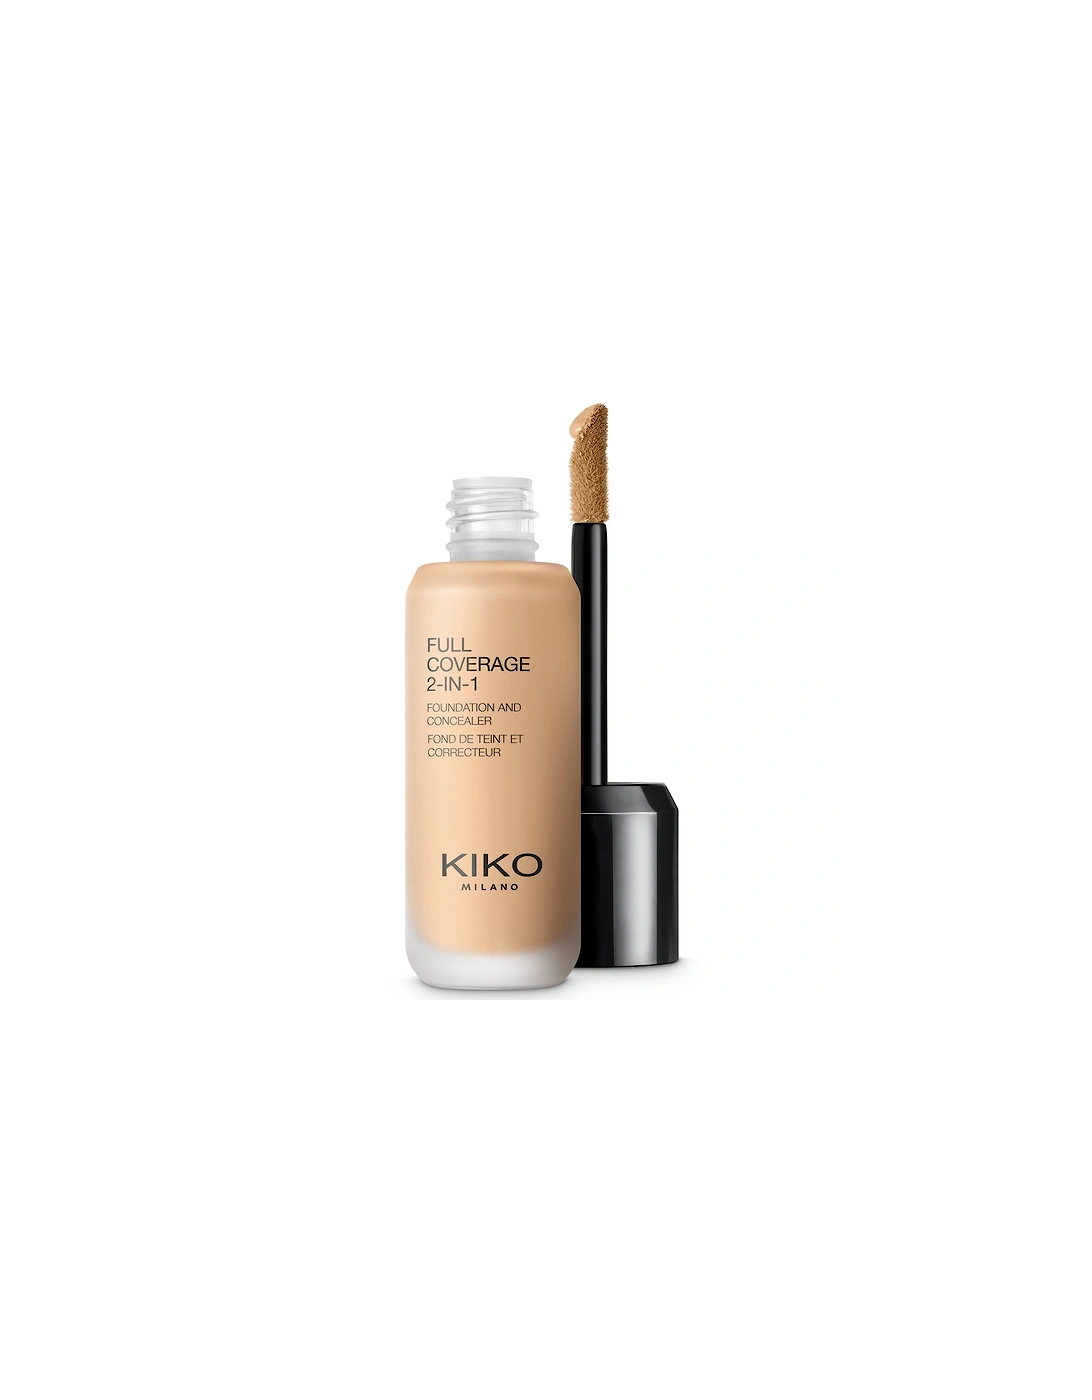 Full Coverage 2-in-1 Foundation and Concealer - 55 Warm Beige, 2 of 1